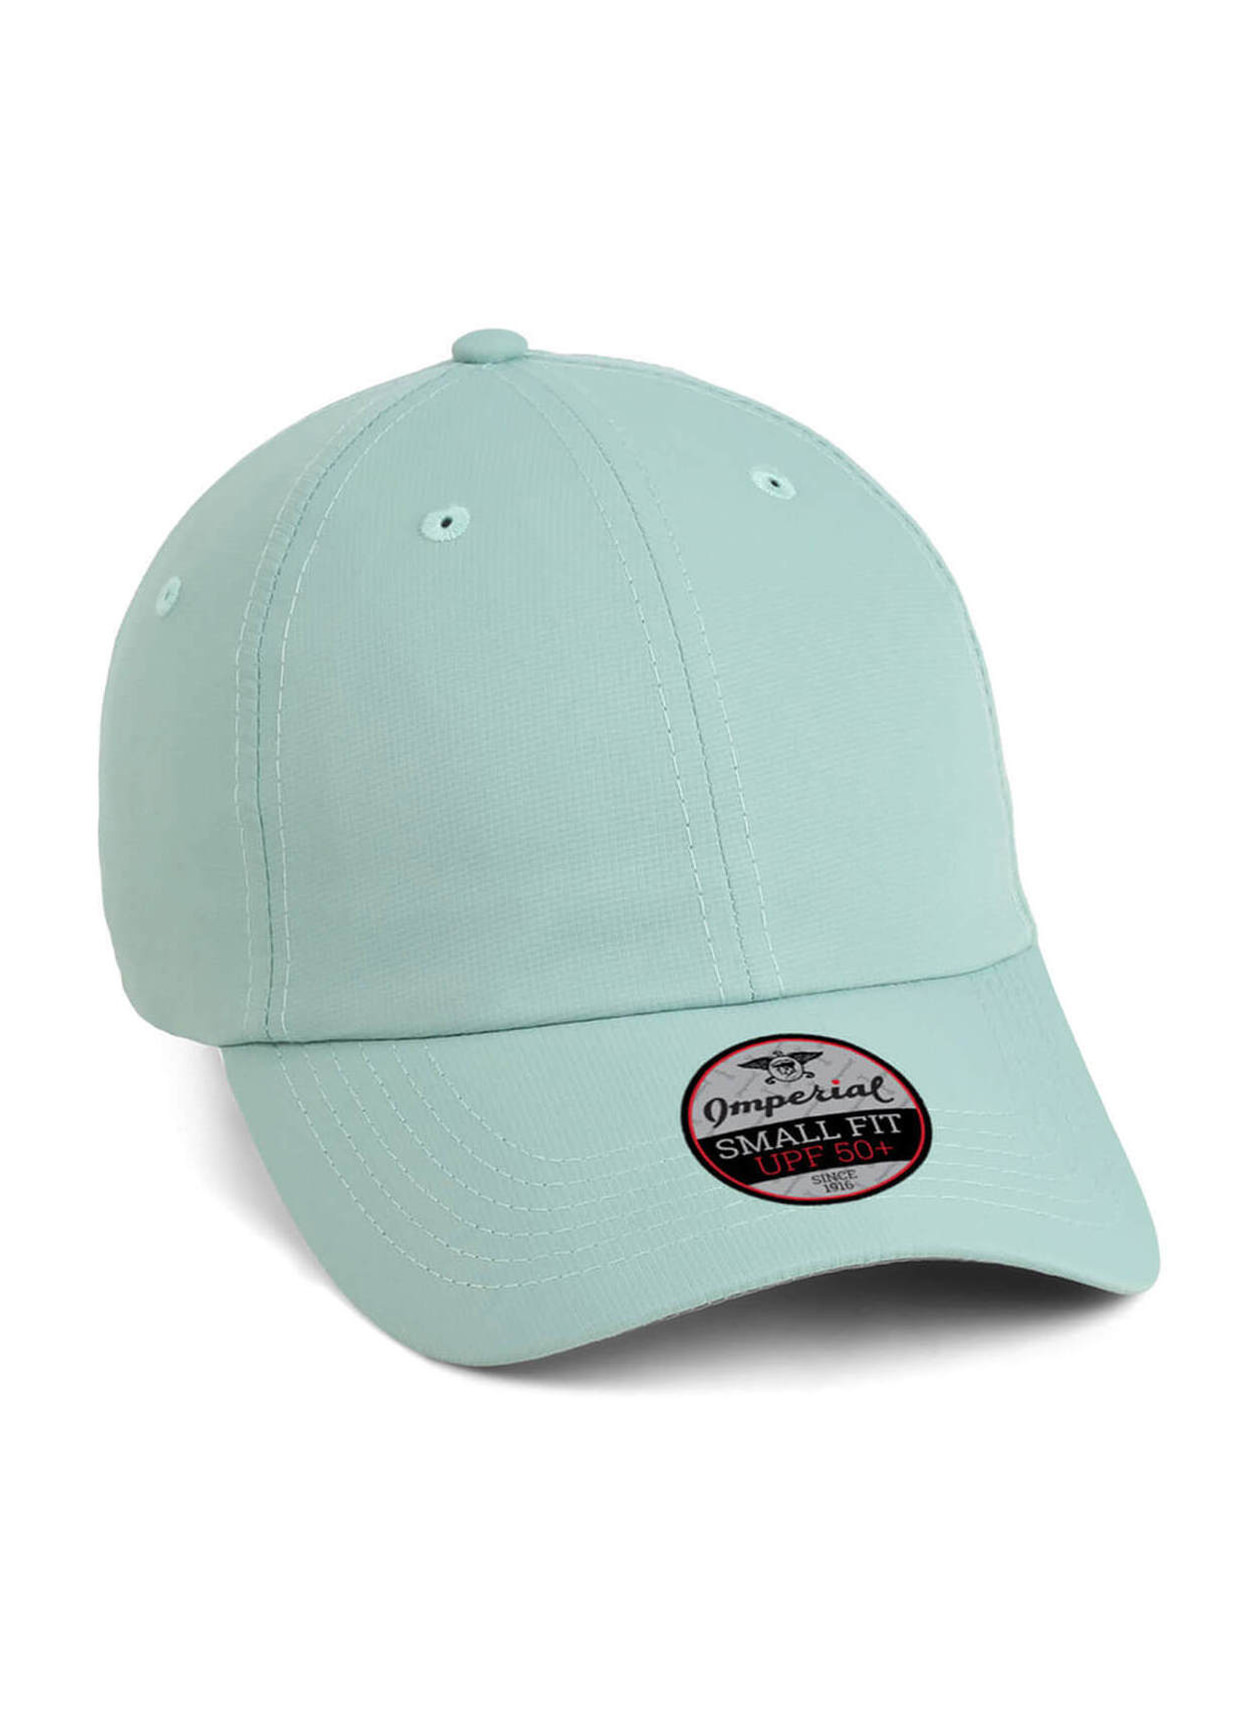 Imperial Sage Original Small Fit Performance Hat